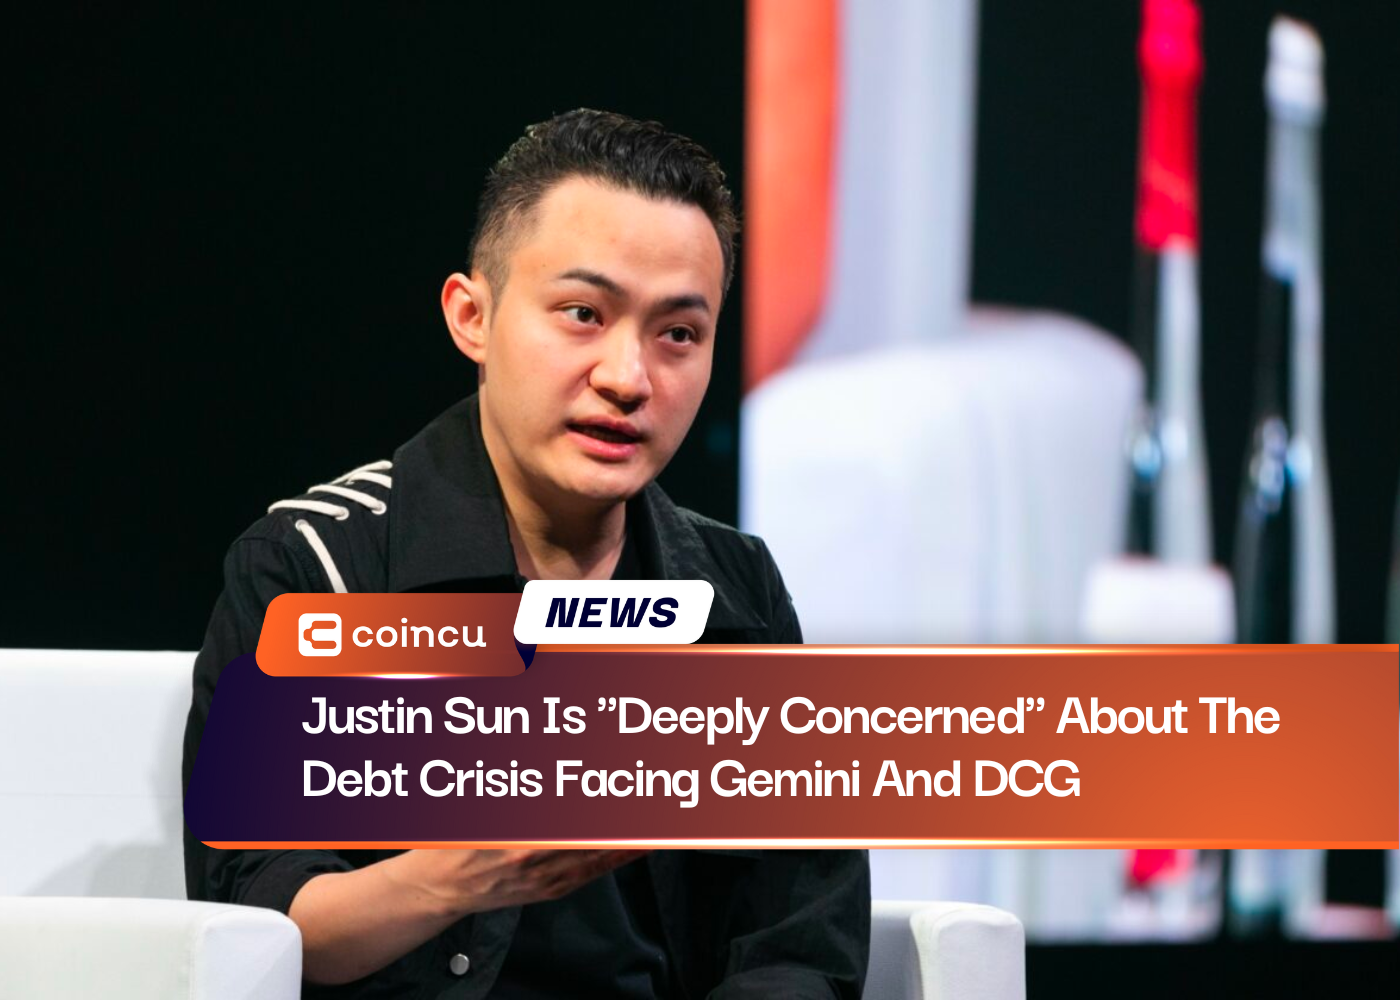 Justin Sun Is "Deeply Concerned" About The Debt Crisis Facing Gemini And DCG